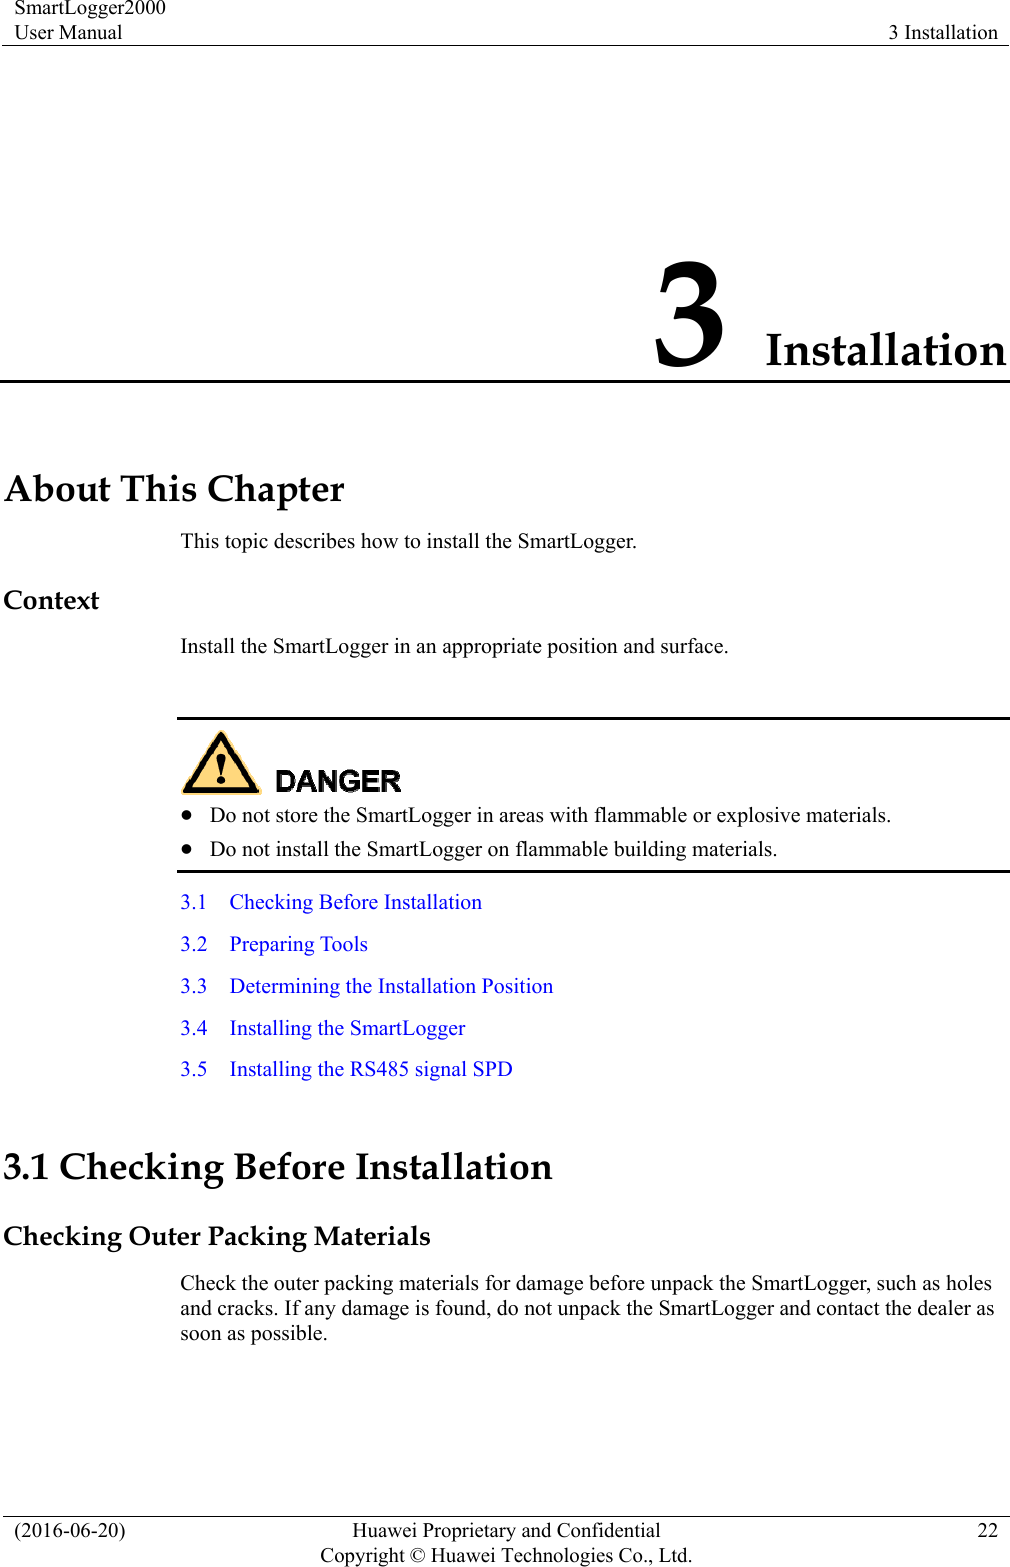 SmartLogger2000 User Manual  3 Installation (2016-06-20)  Huawei Proprietary and Confidential         Copyright © Huawei Technologies Co., Ltd.22 3 Installation About This Chapter This topic describes how to install the SmartLogger. Context Install the SmartLogger in an appropriate position and surface.    Do not store the SmartLogger in areas with flammable or explosive materials.  Do not install the SmartLogger on flammable building materials. 3.1    Checking Before Installation 3.2  Preparing Tools 3.3  Determining the Installation Position 3.4  Installing the SmartLogger 3.5    Installing the RS485 signal SPD 3.1 Checking Before Installation Checking Outer Packing Materials Check the outer packing materials for damage before unpack the SmartLogger, such as holes and cracks. If any damage is found, do not unpack the SmartLogger and contact the dealer as soon as possible. 